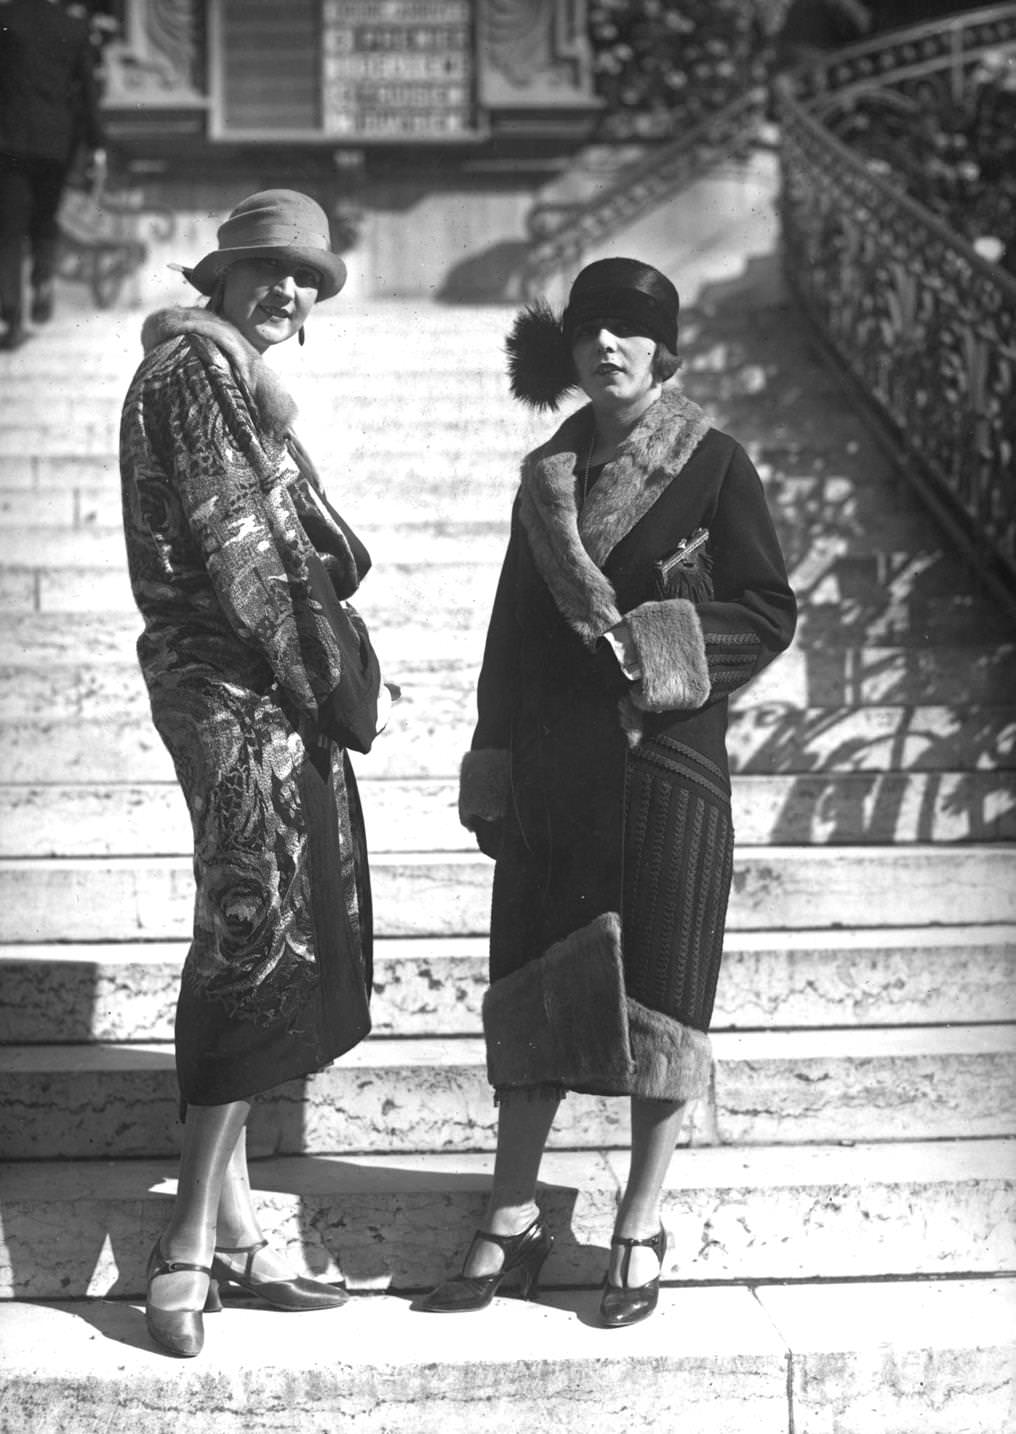 A model wearing a printed silk coat, with a model wearing a fur-lined coat and decorative hat, 1924